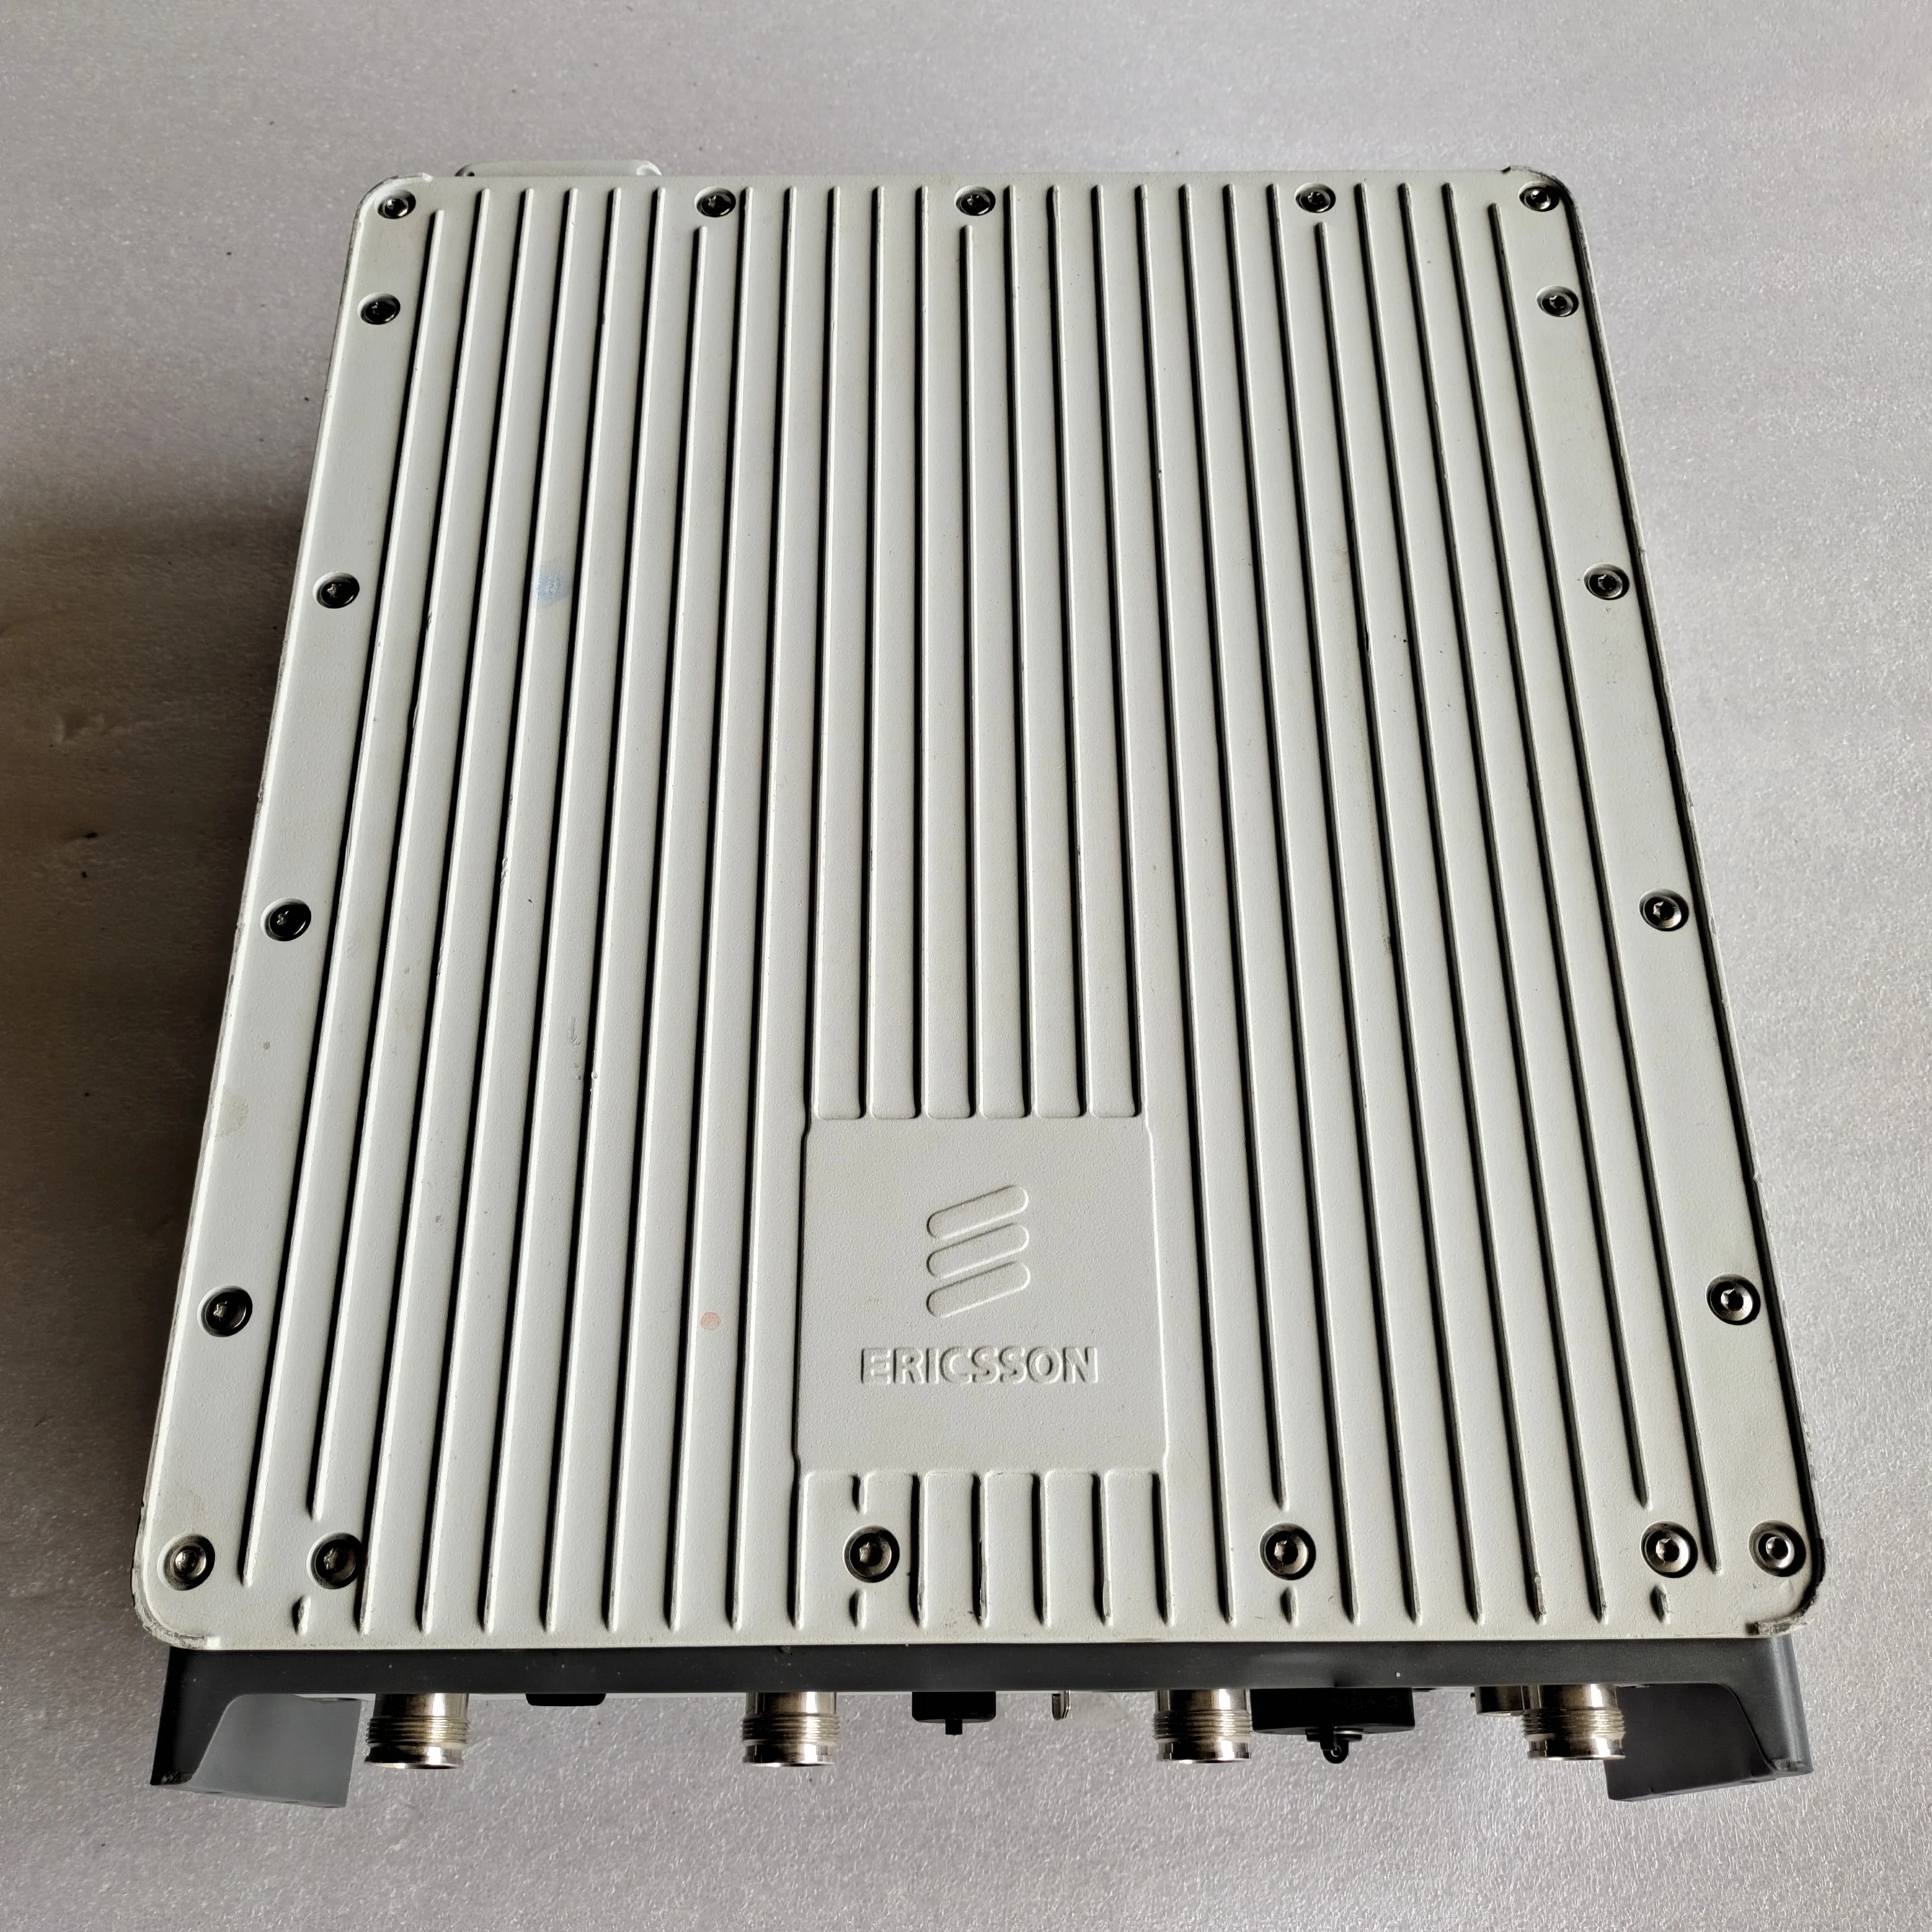 YUNPAN gsm bts base station factory for stairwells-5